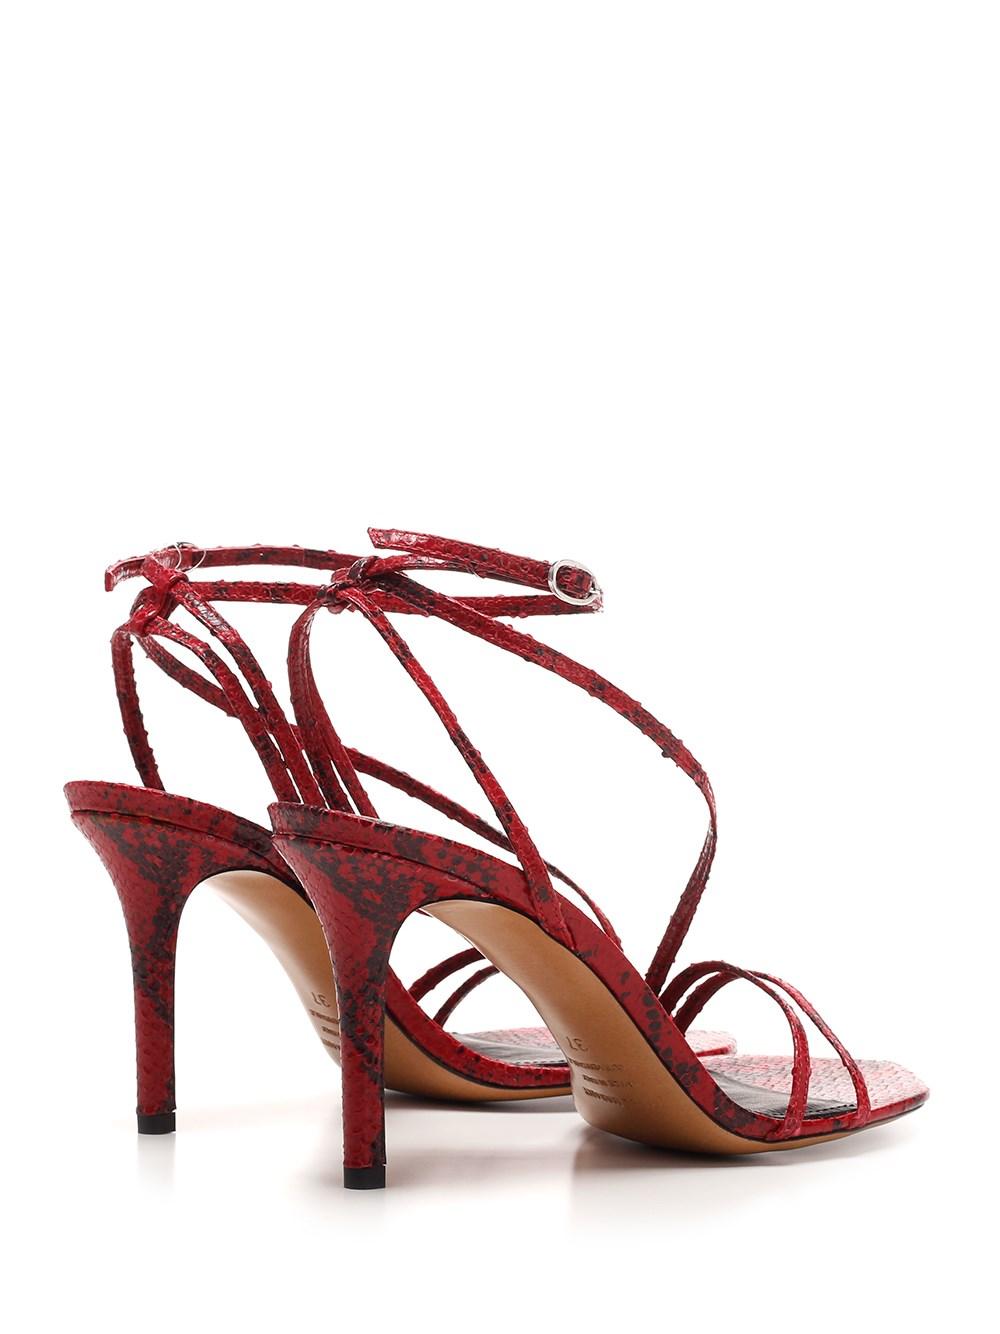 Isabel Marant Aridee Red Leather Sandals - Save 46% - Lyst